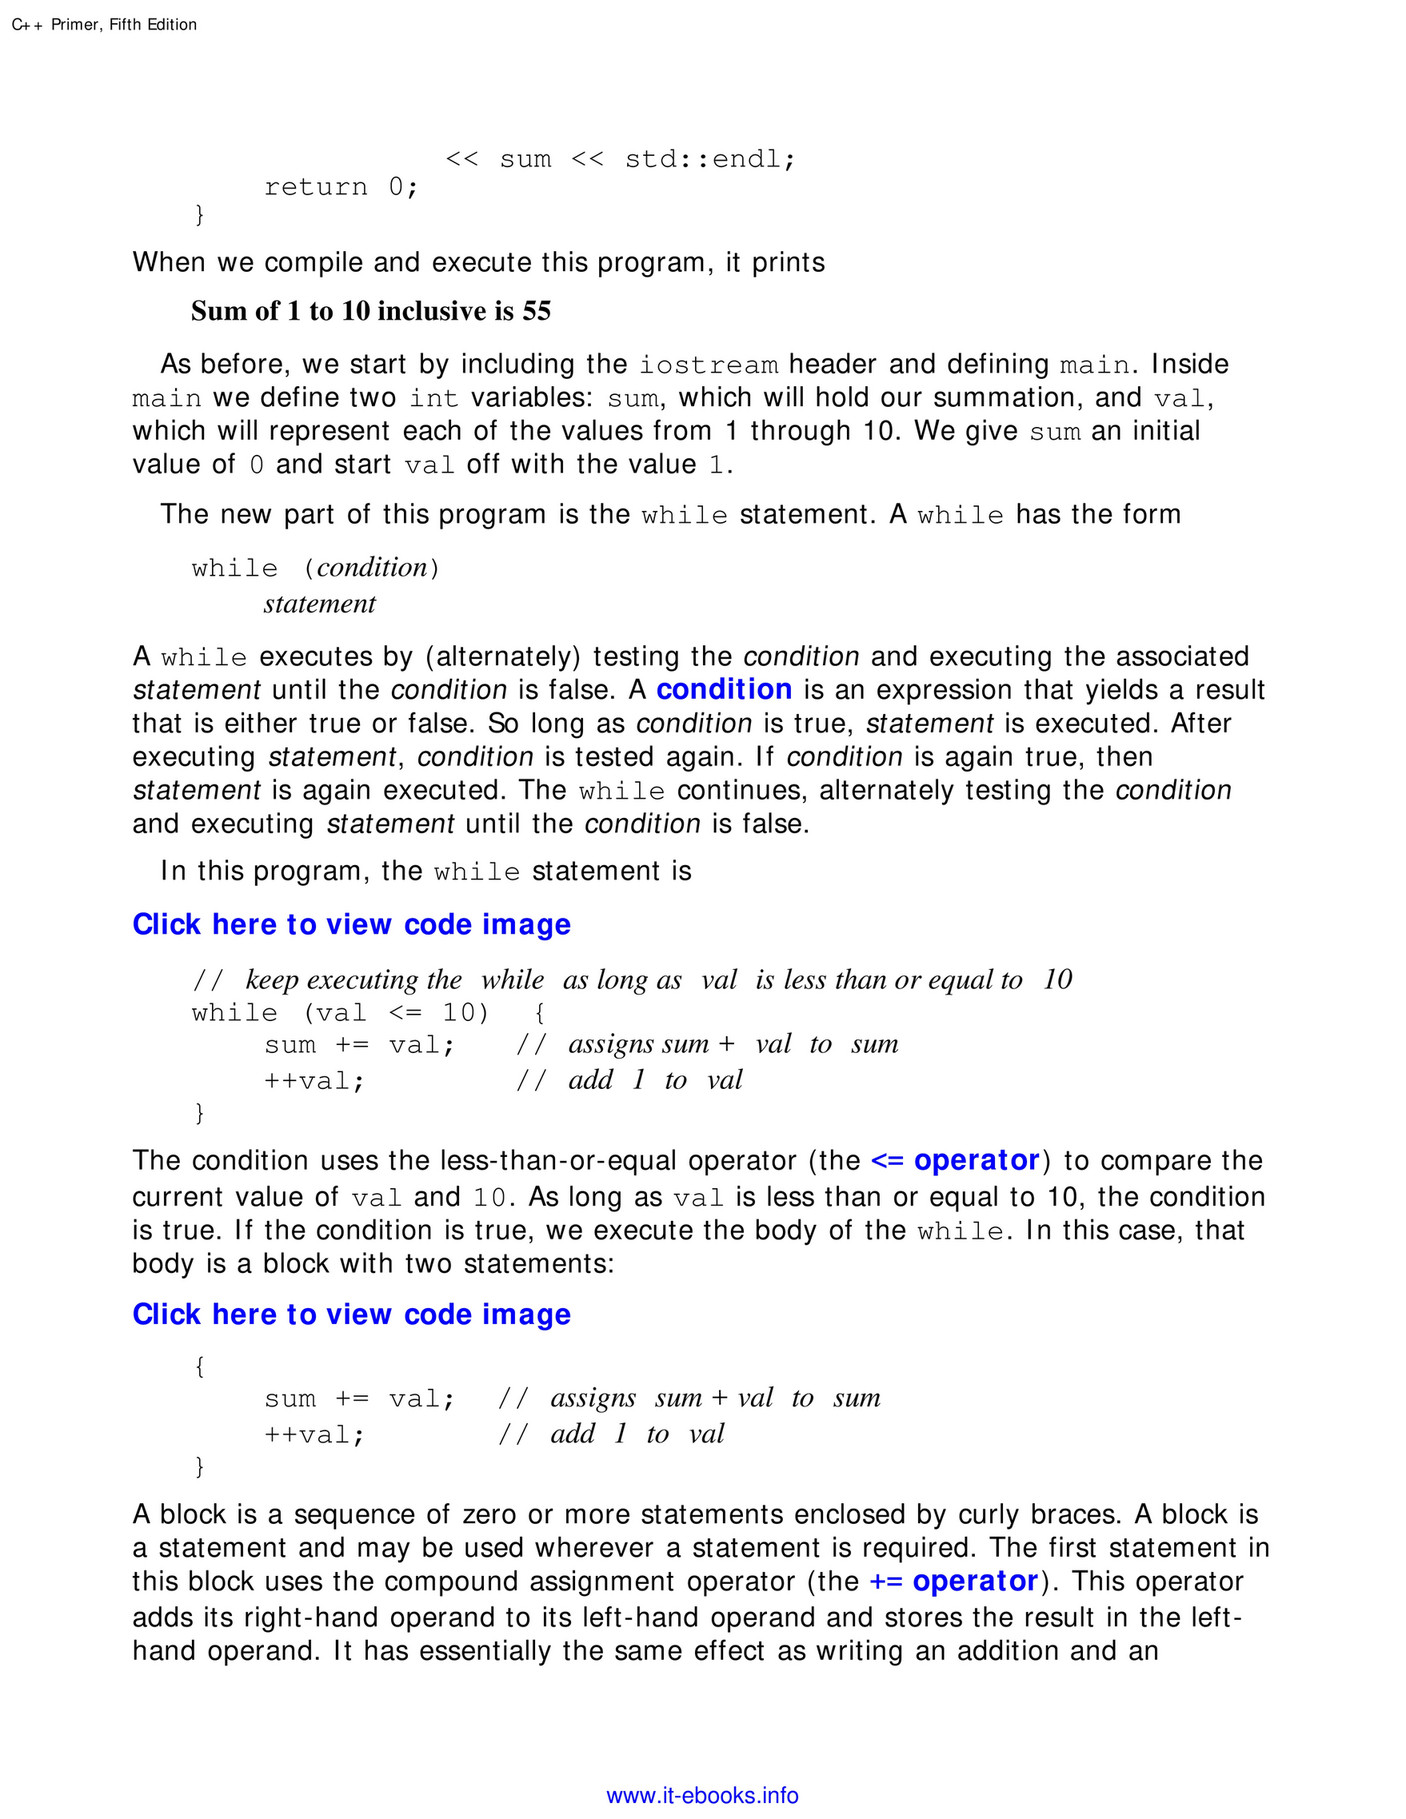 My publications - C++ Primer, 5th Edition - Page 706-707 - Created with  Publitas.com